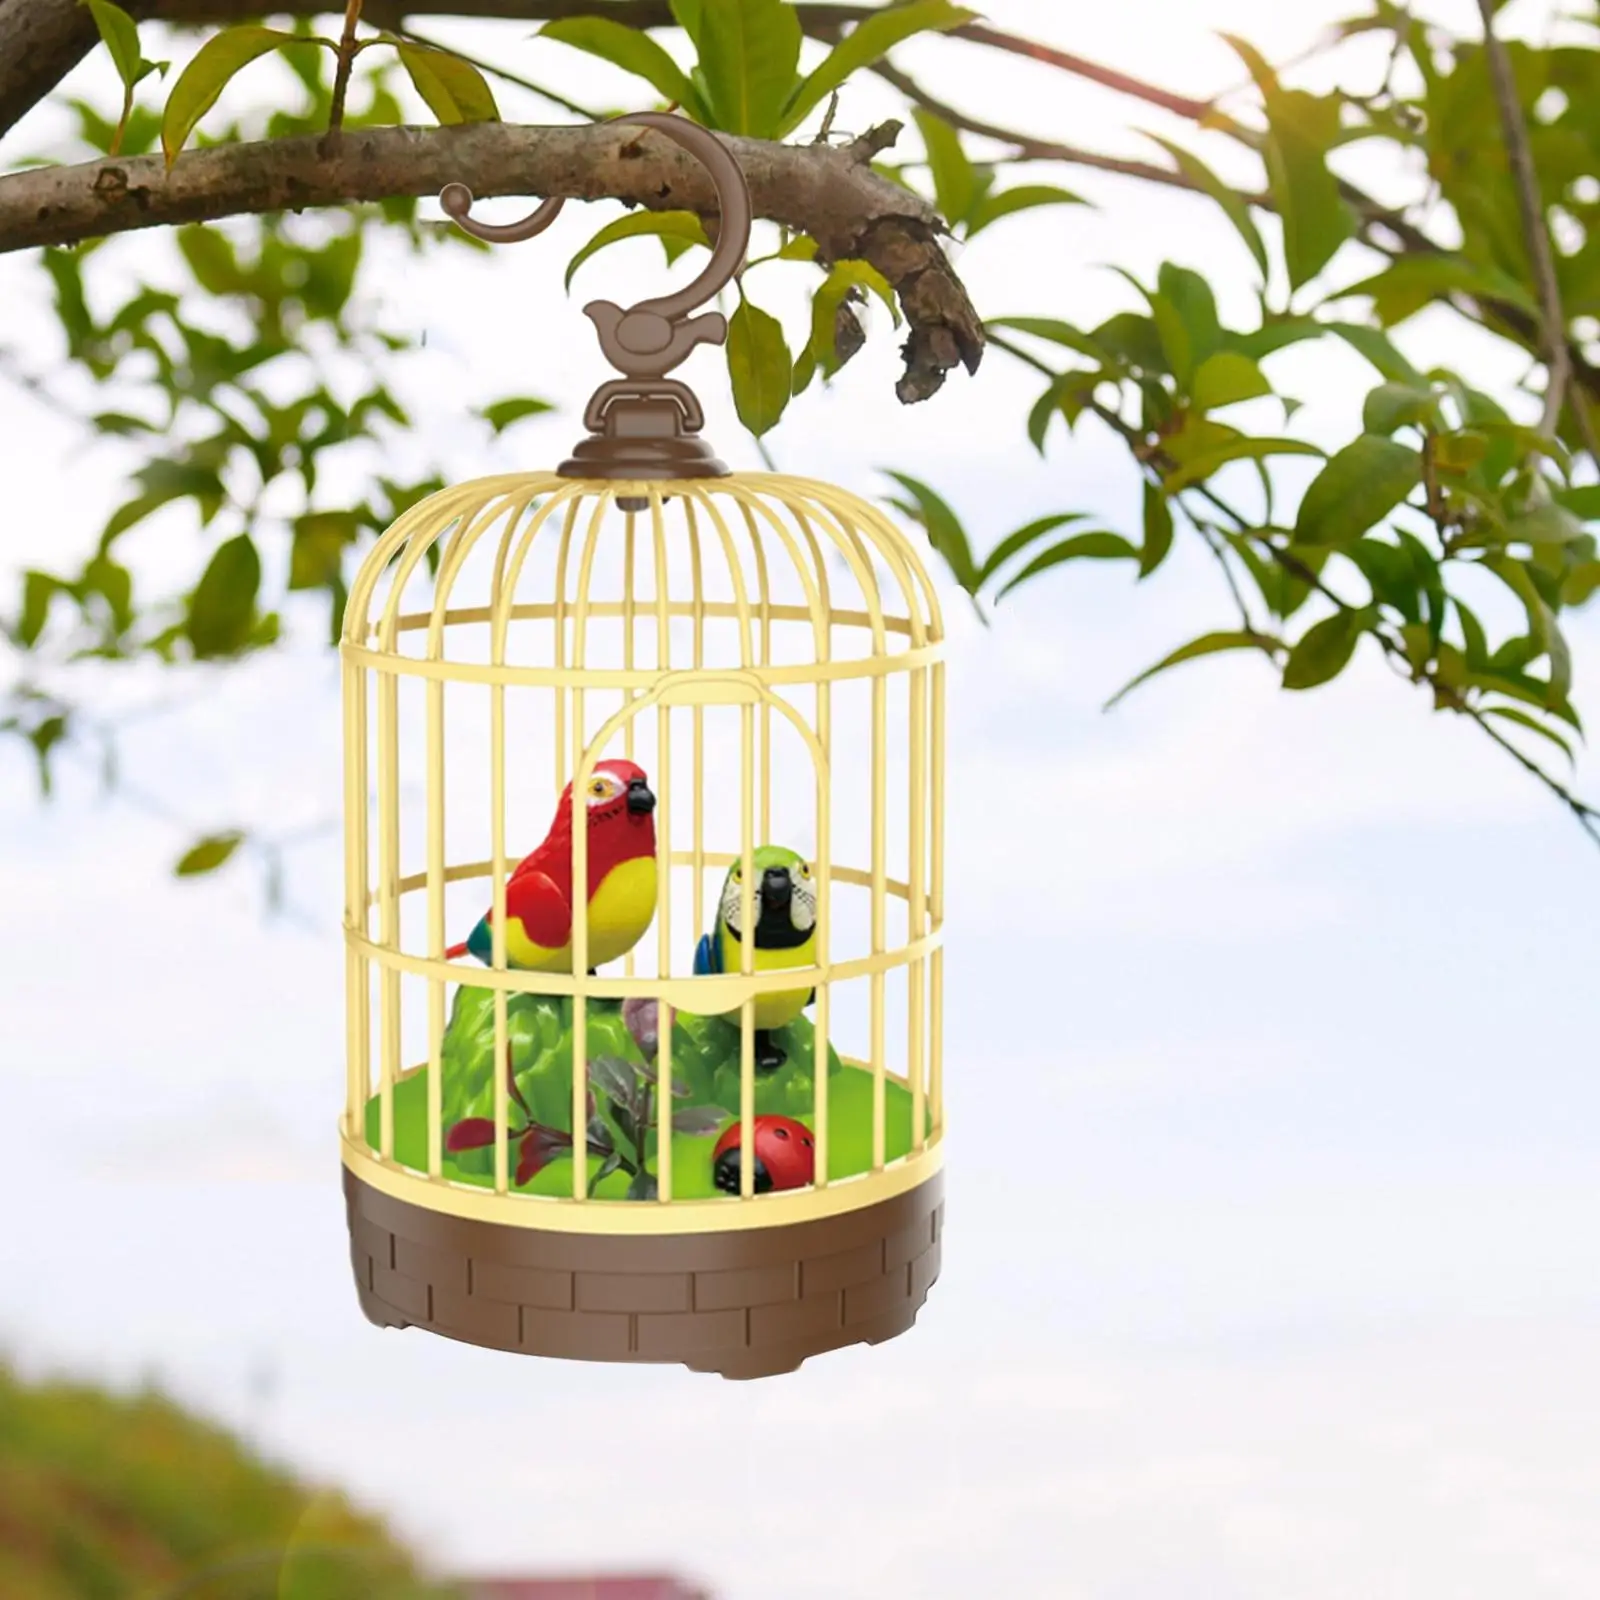 Singing & Chirping Bird in Cage Realistic Sounds & Movements, Sound Gift for Kids